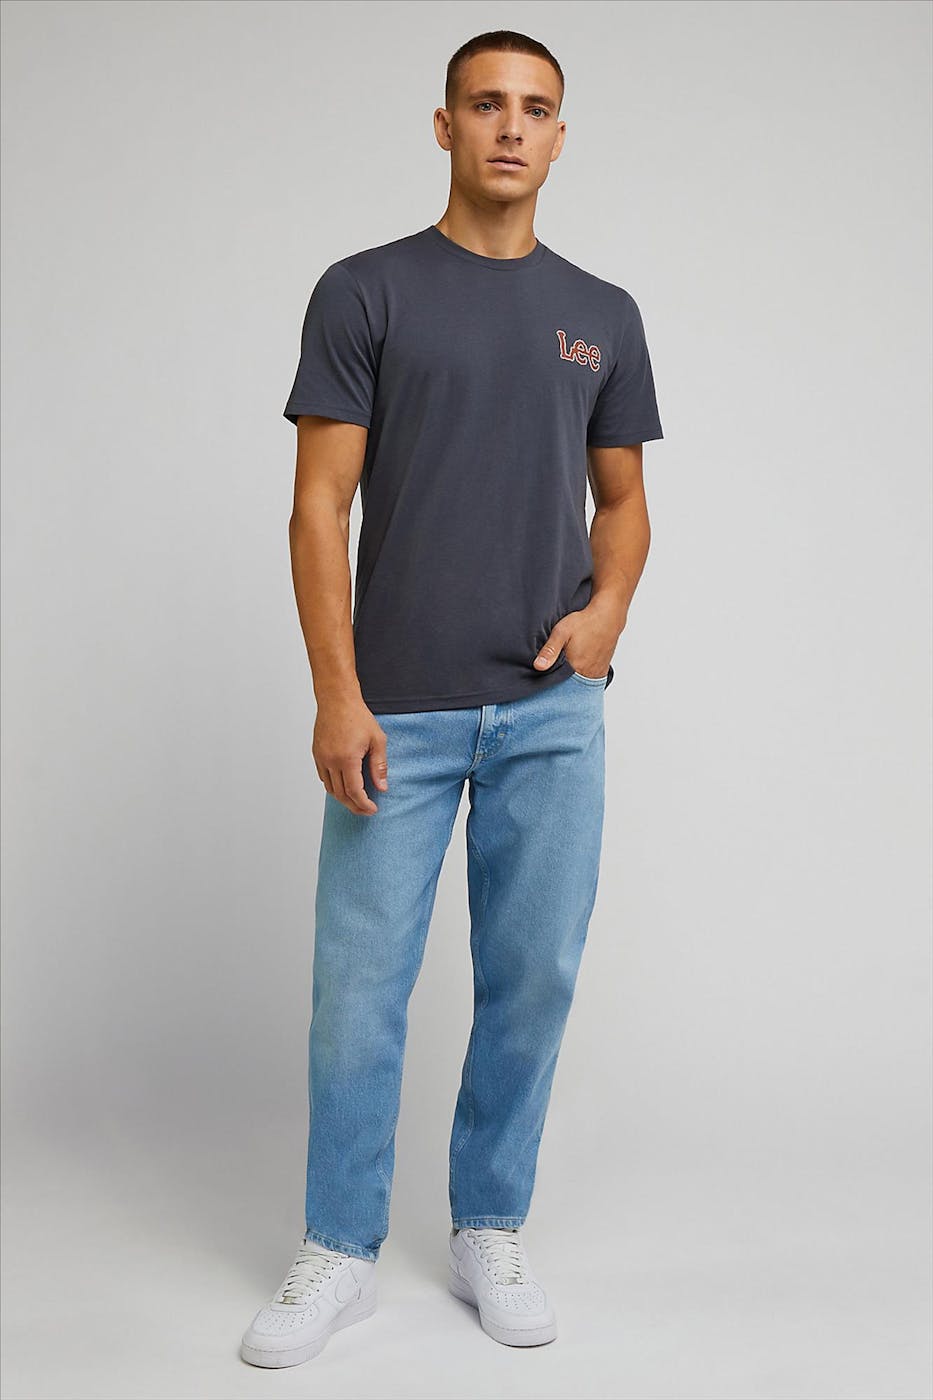 Lee - Lichtblauwe Oscar Relaxed Tapered jeans